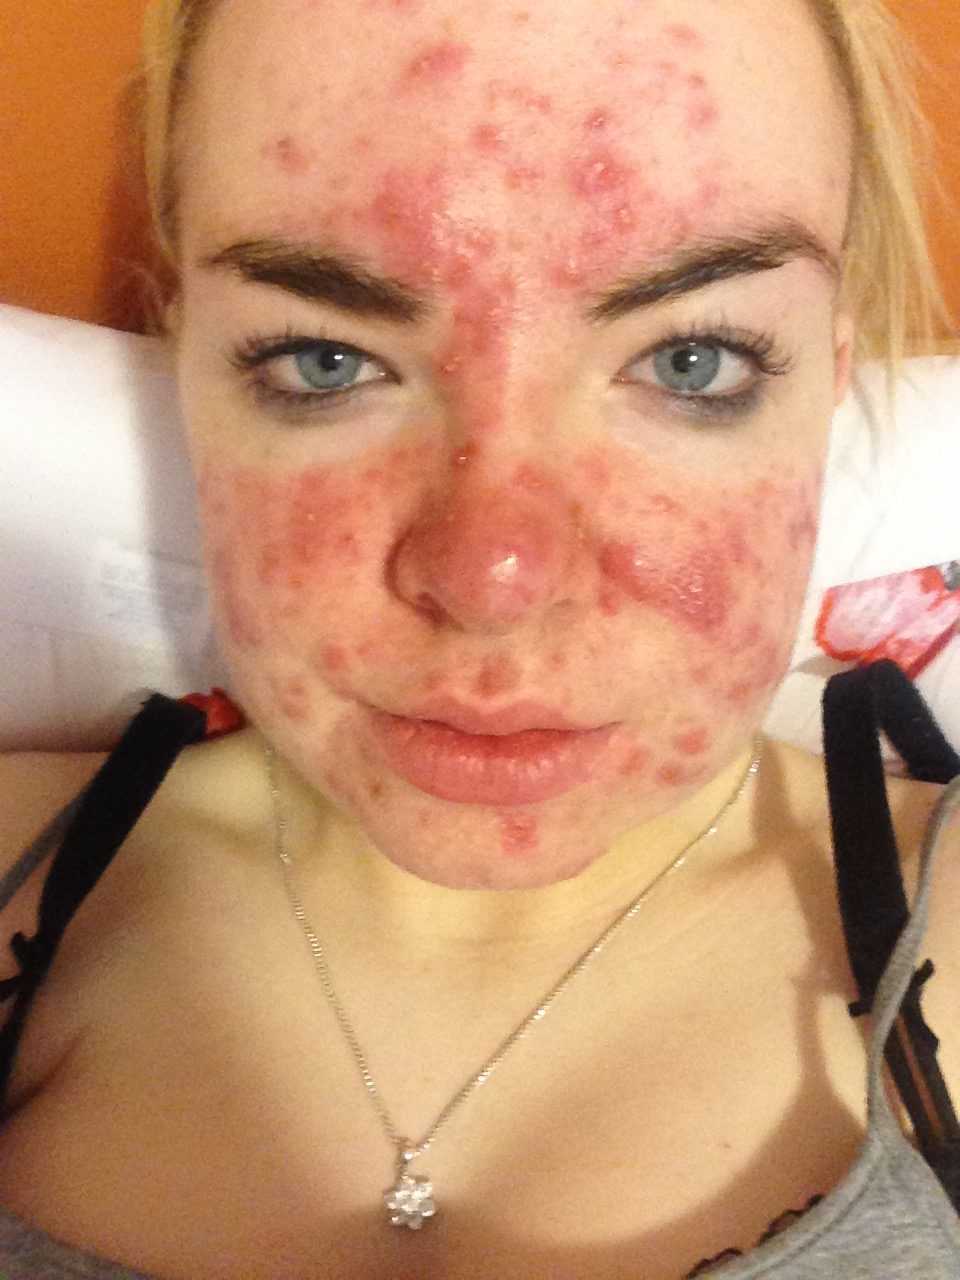 Update on my story with Acne!